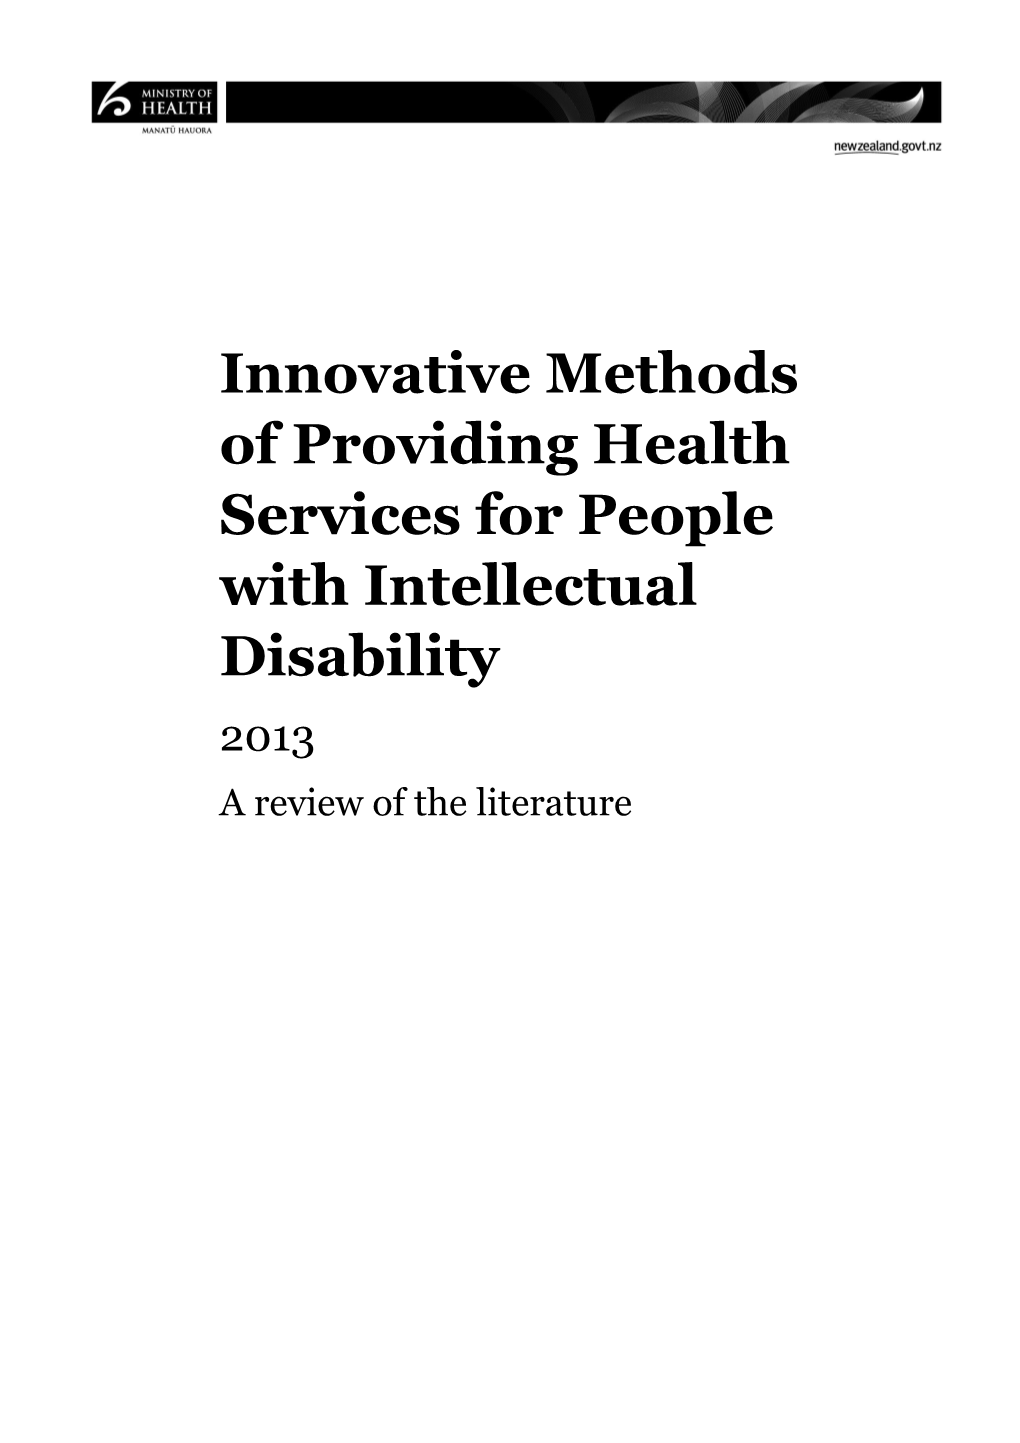 Innovative Methods of Providing Health Services for People with Intellectual Disability